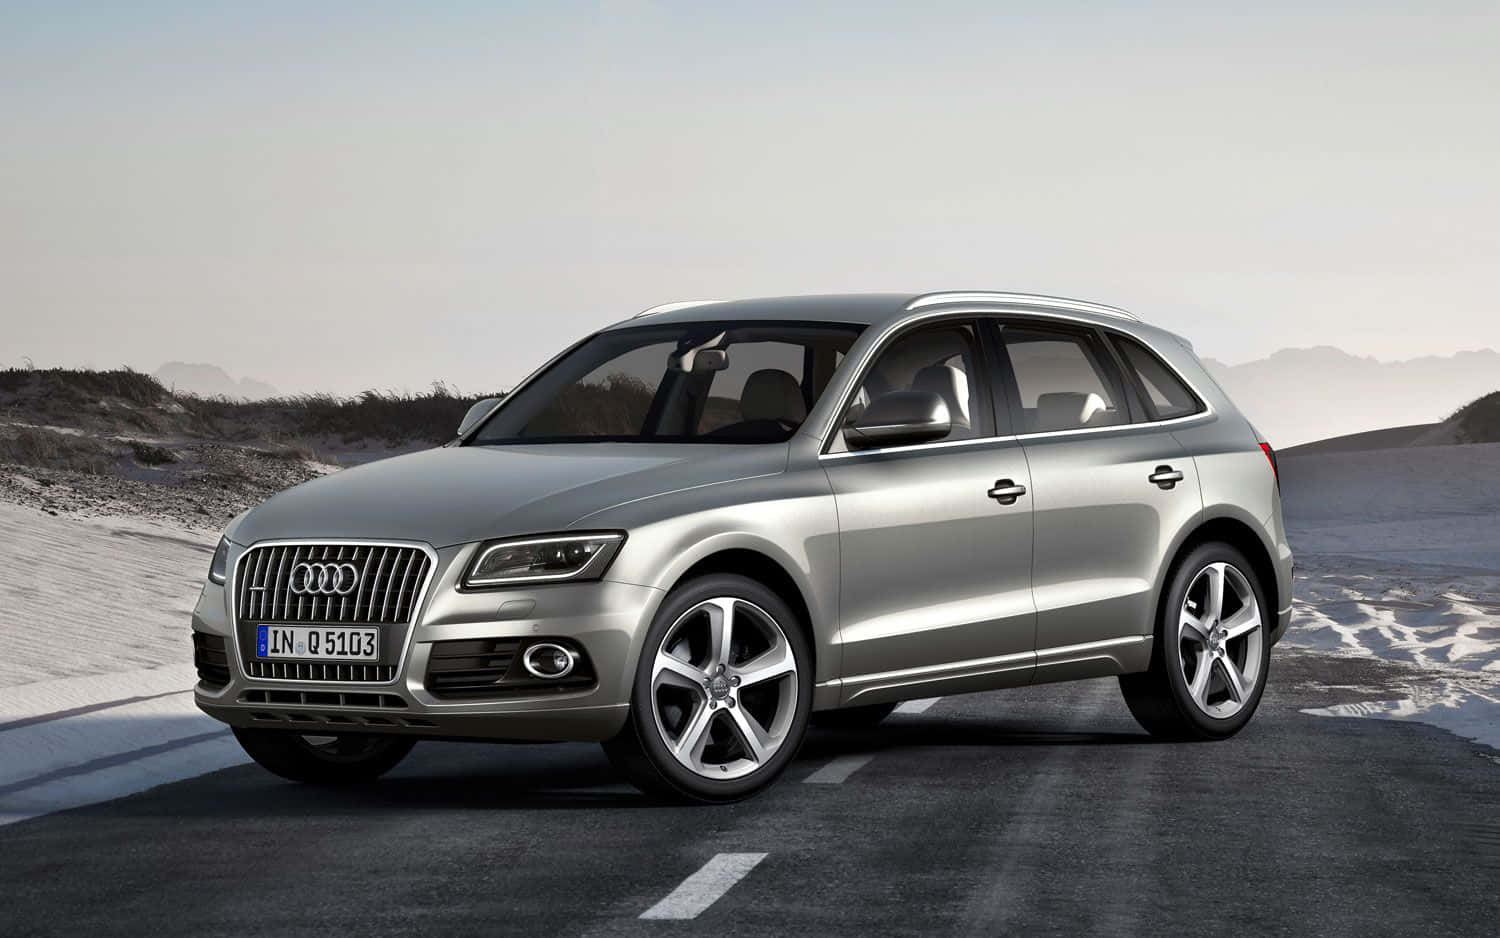 Immaculate Audi Q5 in Action Wallpaper